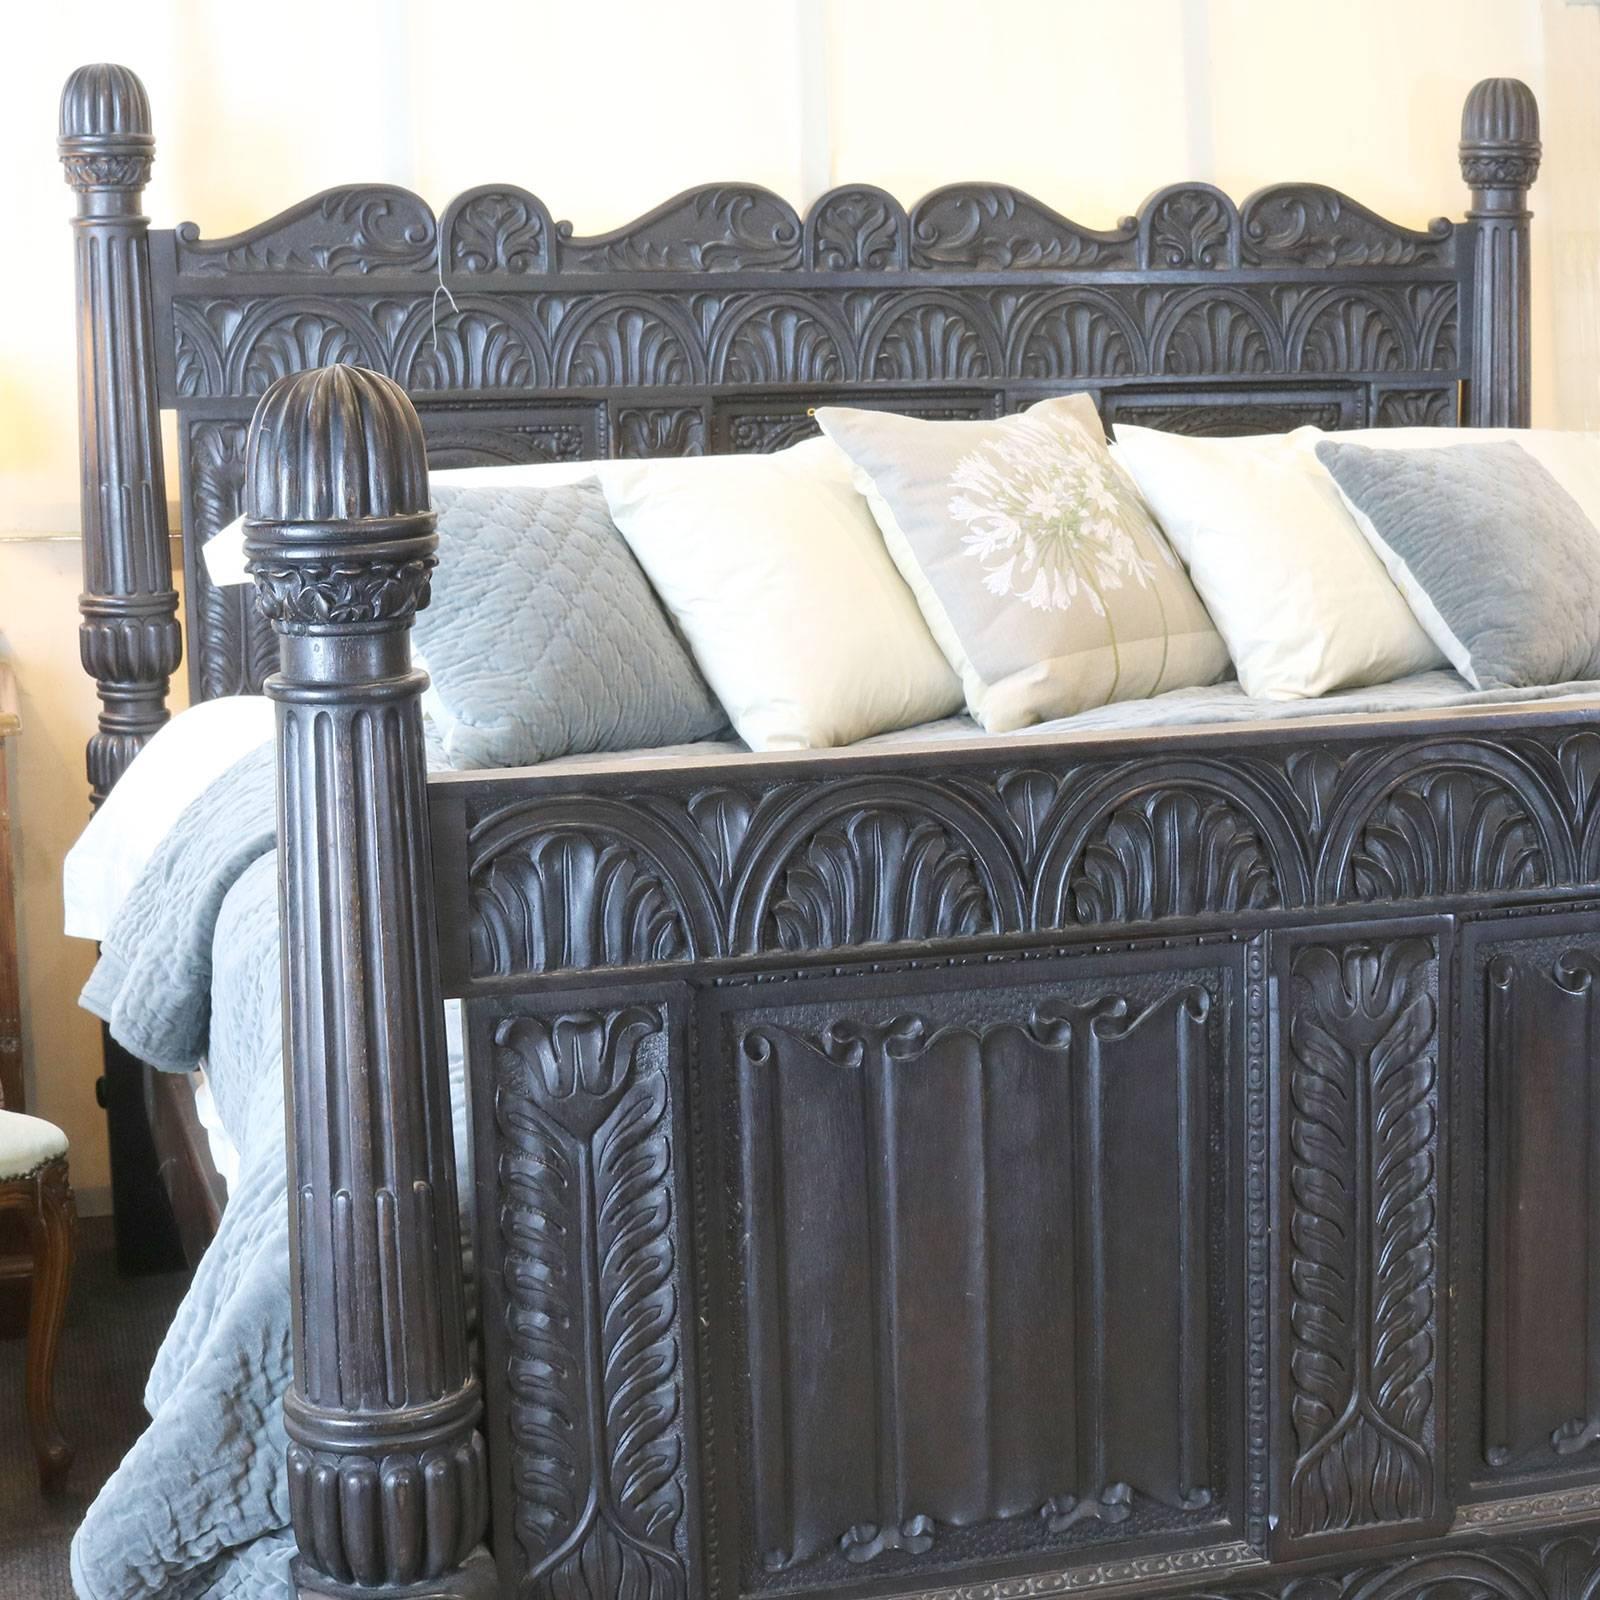 A magnificent ebonised Jacobean style bed from the mid-20th century. This superb piece is expertly carved with linen fold panels and turns posts. The back board has a tree of life in the centre flanked by two depictions of Adam and Eve eating the